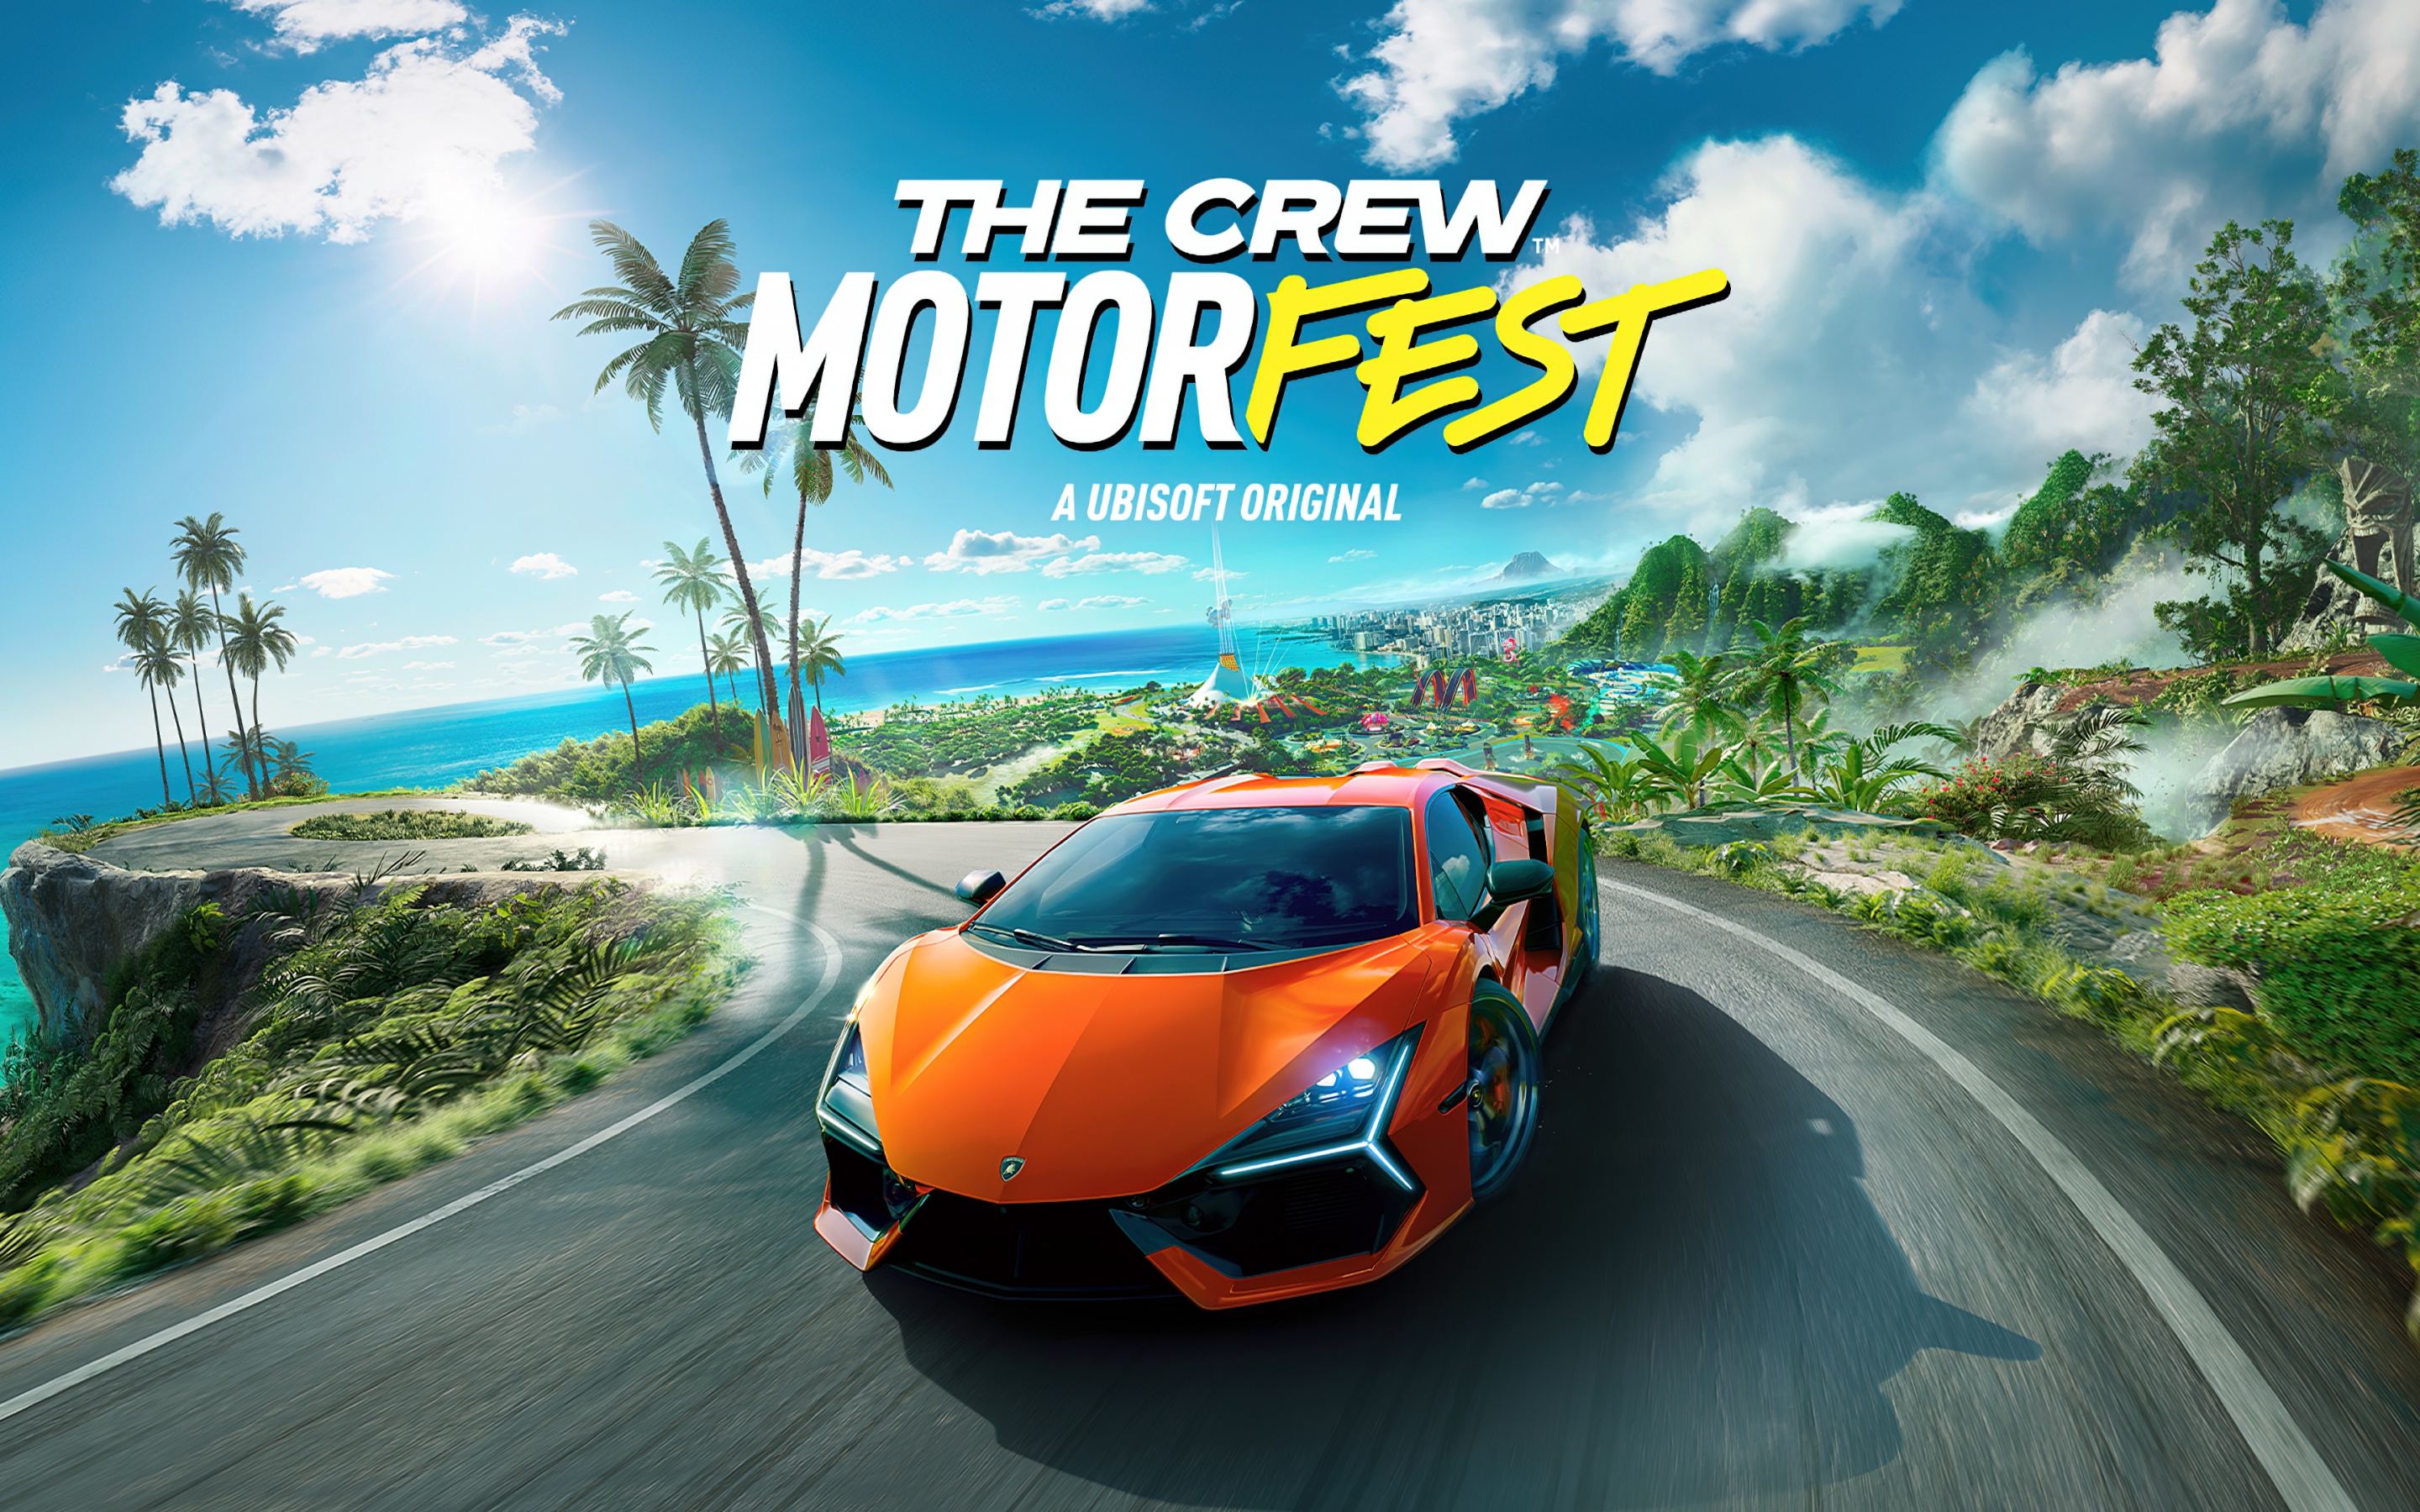 The Crew Motorfest on X: Is this car blue or black?   / X